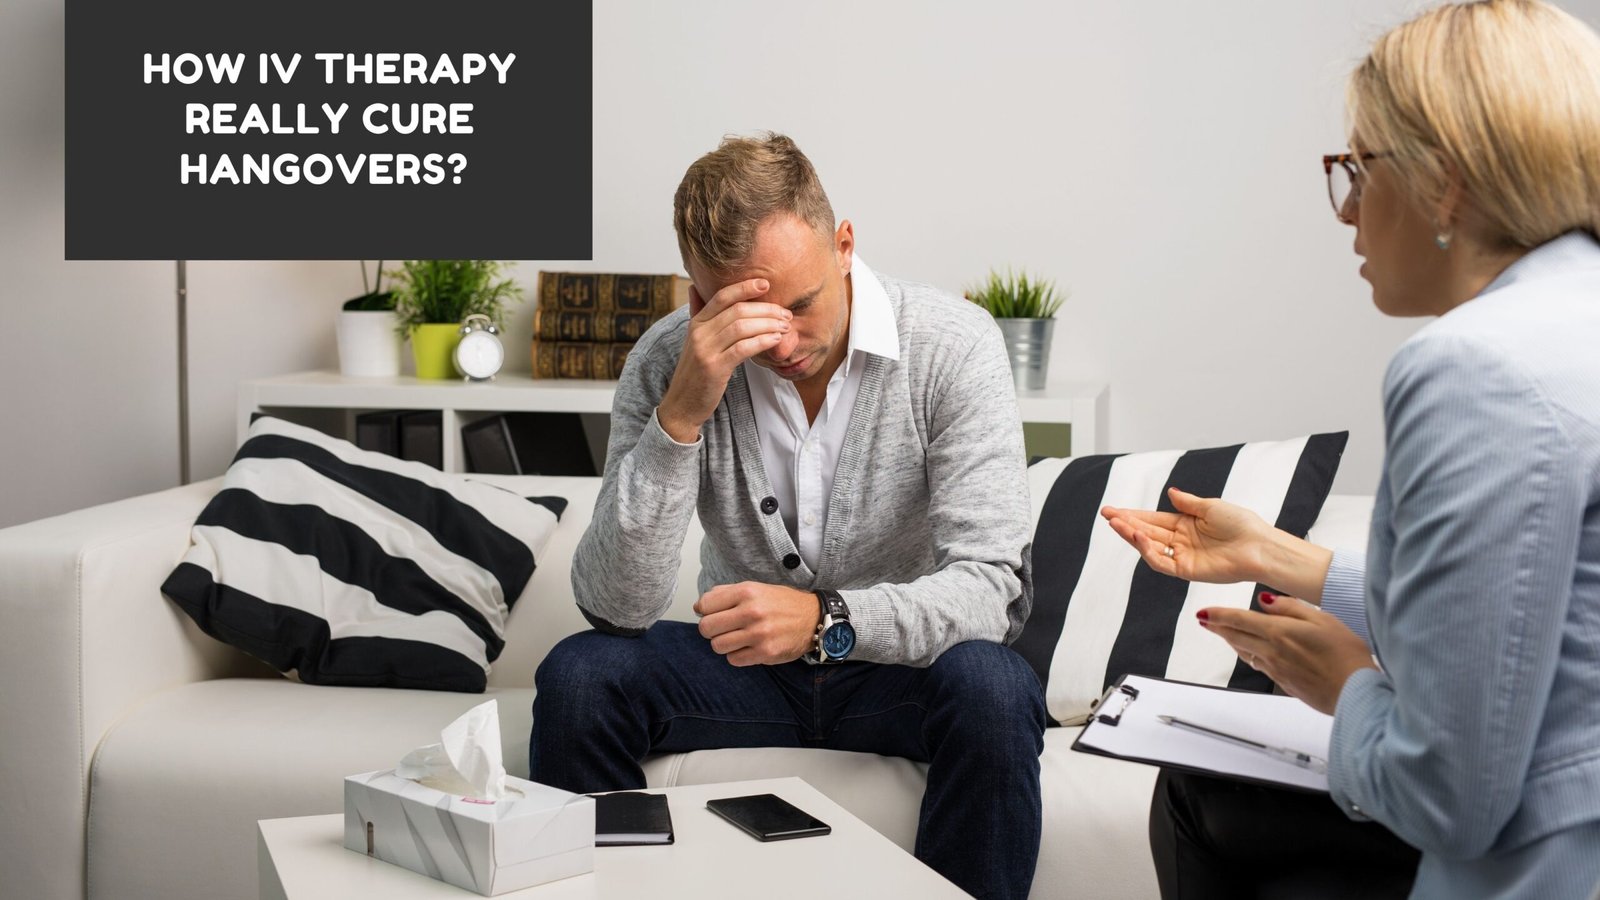 How IV Therapy Really Cure Hangovers?